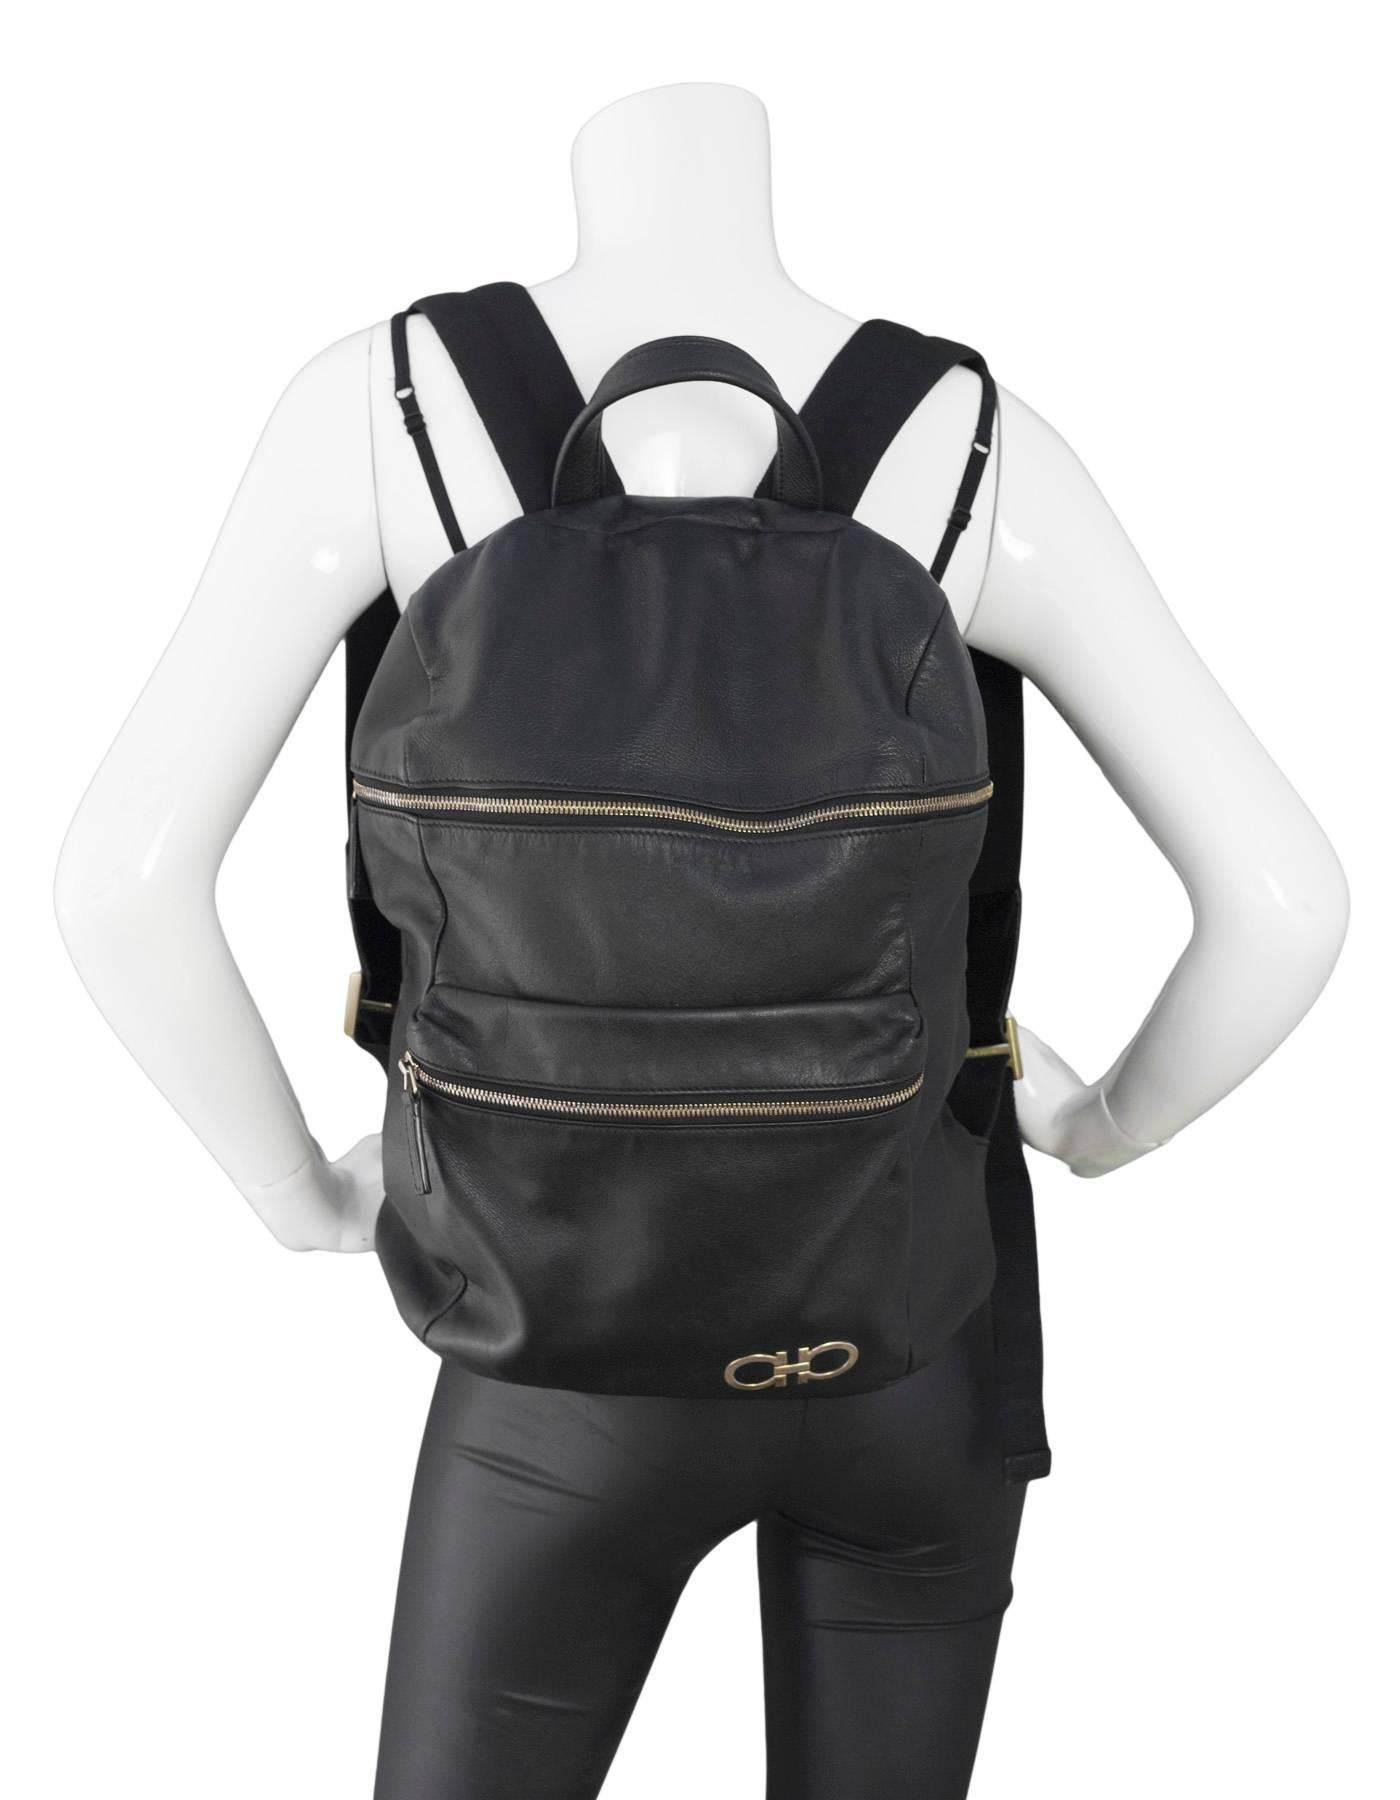 Salvatore Ferragamo Black Nevada Gancini Backpack

Made In: Italy
Hardware: Goldtone
Materials: Leather and metal
Lining: Black textile
Closure/Opening: Zip closure
Exterior Pockets: One front zip pocket
Interior Pockets: One zip wall pocket
Retail